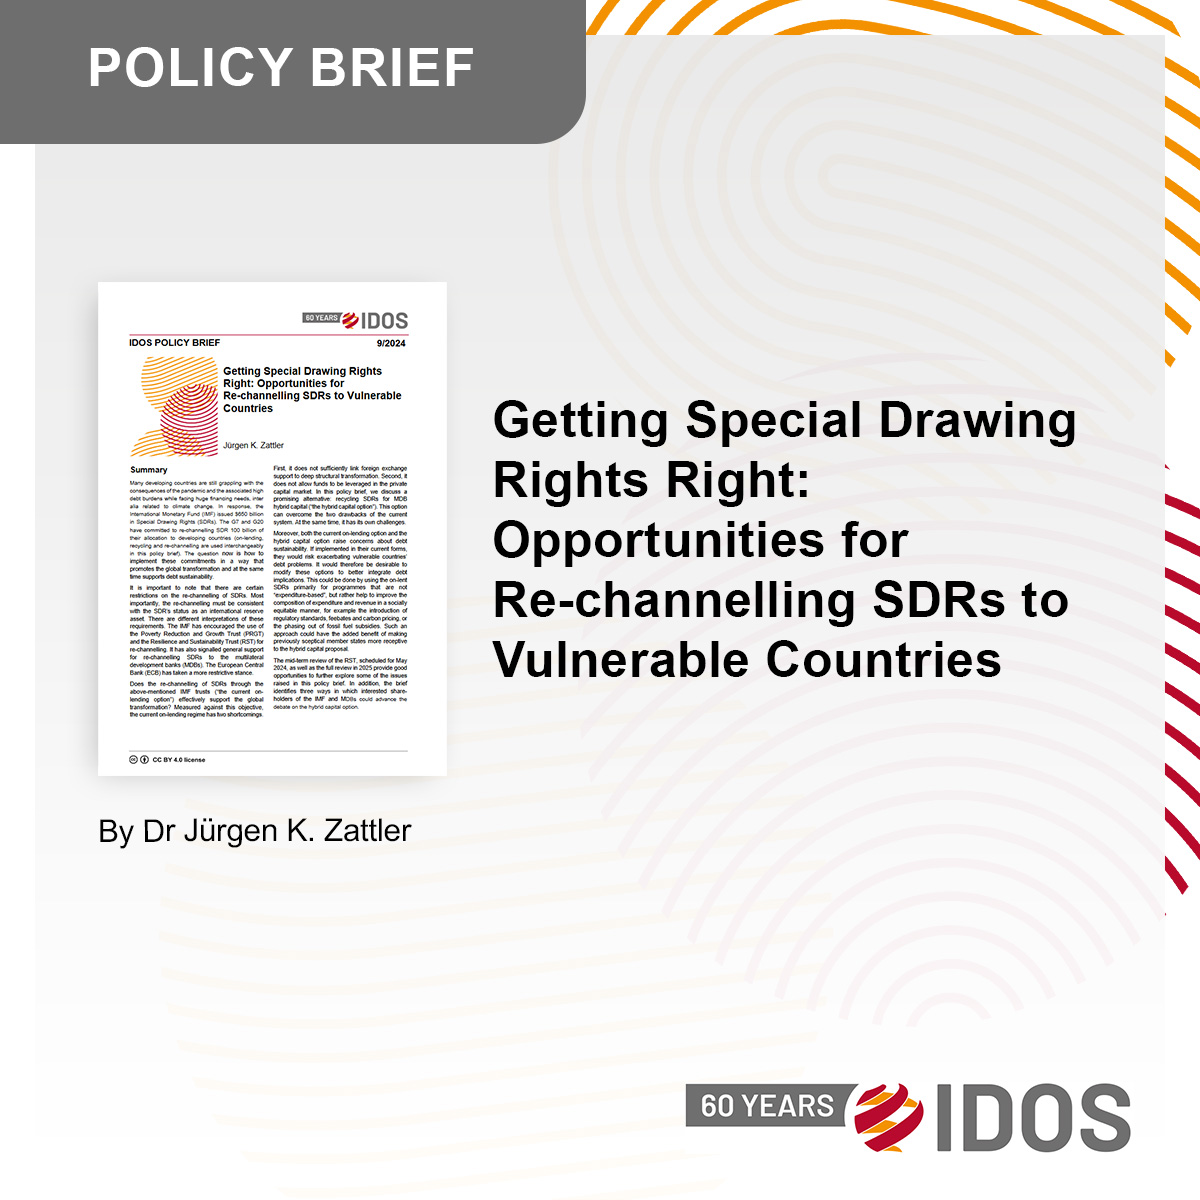 📚 IDOS #PolicyBrief 'The #G7 and #G20 have committed to re-channelling 100 billion worth of #SDRs to #DevelopingCountries. This could provide urgently needed breathing space to vulnerable developing countries.' ➡️ Jürgen Zattler in: idos-research.de/policy-brief/a… | #WBGMeetings